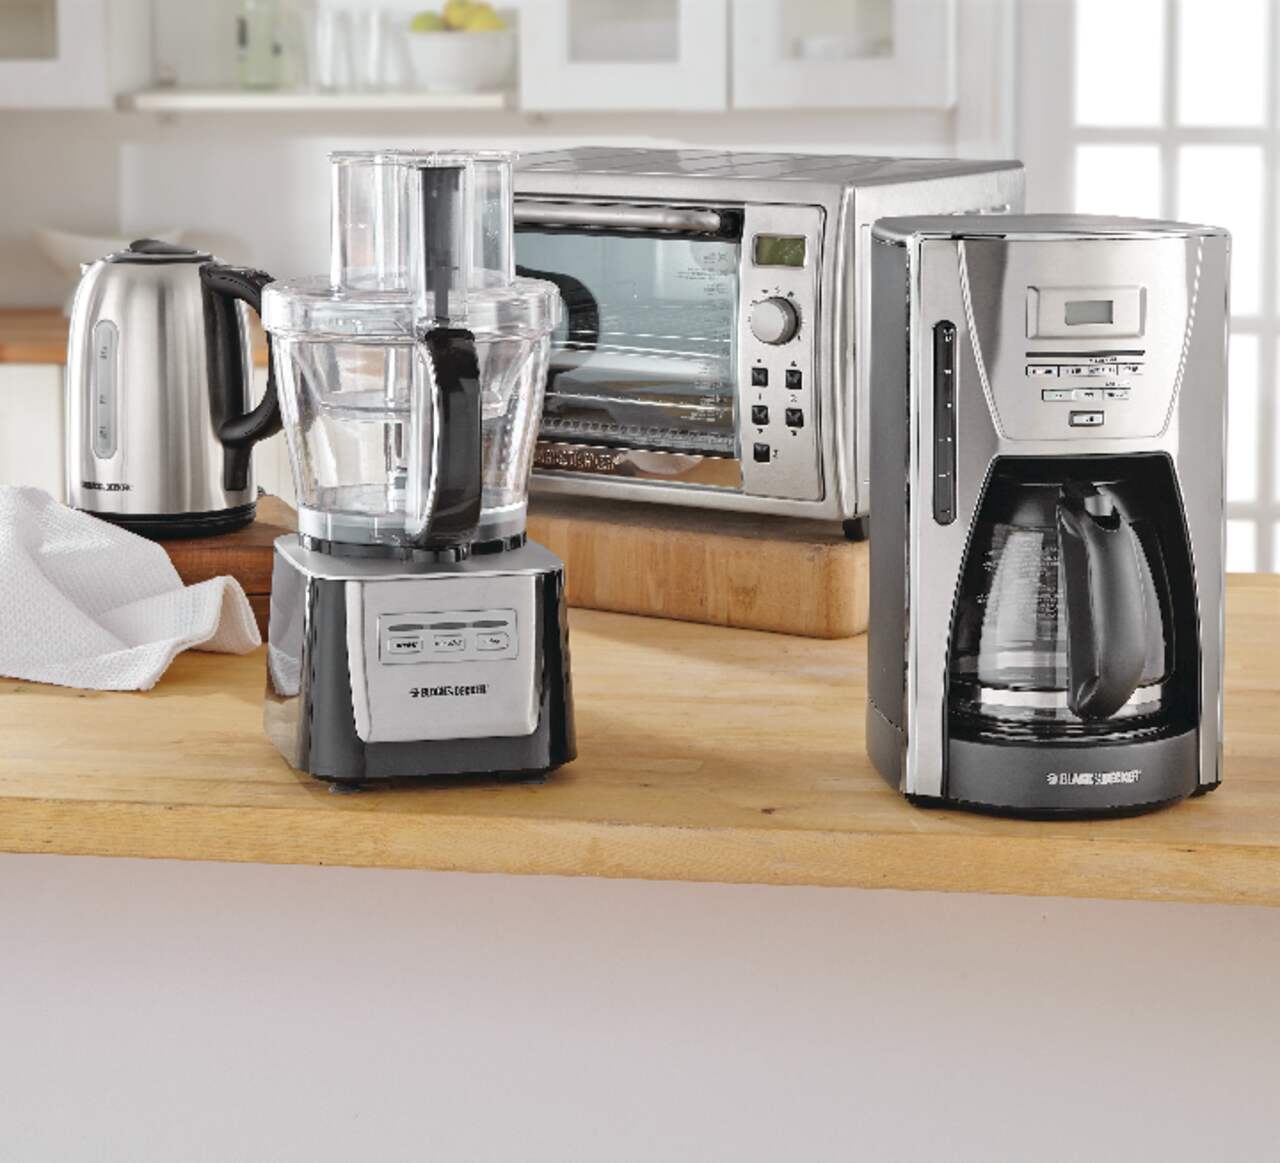 https://media-www.canadiantire.ca/product/living/kitchen/kitchen-appliances/0430421/b-d12-cup-glass-coffee-maker-w-stainless-steel-accents-e2e9574a-7cf9-4185-83ad-1246f79b224c.png?imdensity=1&imwidth=1244&impolicy=mZoom